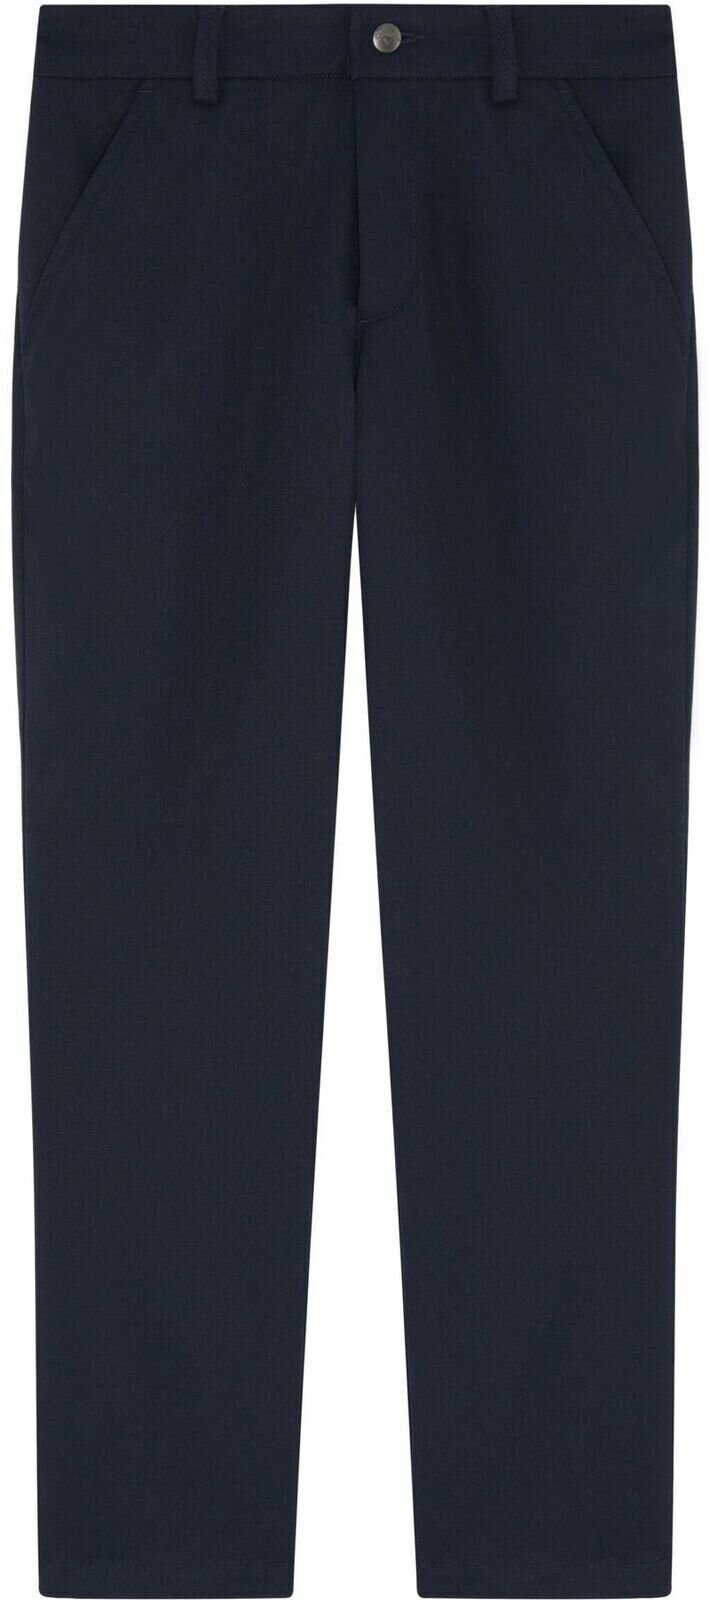 Kalhoty Callaway Boys Solid Prospin Pant Night Sky S